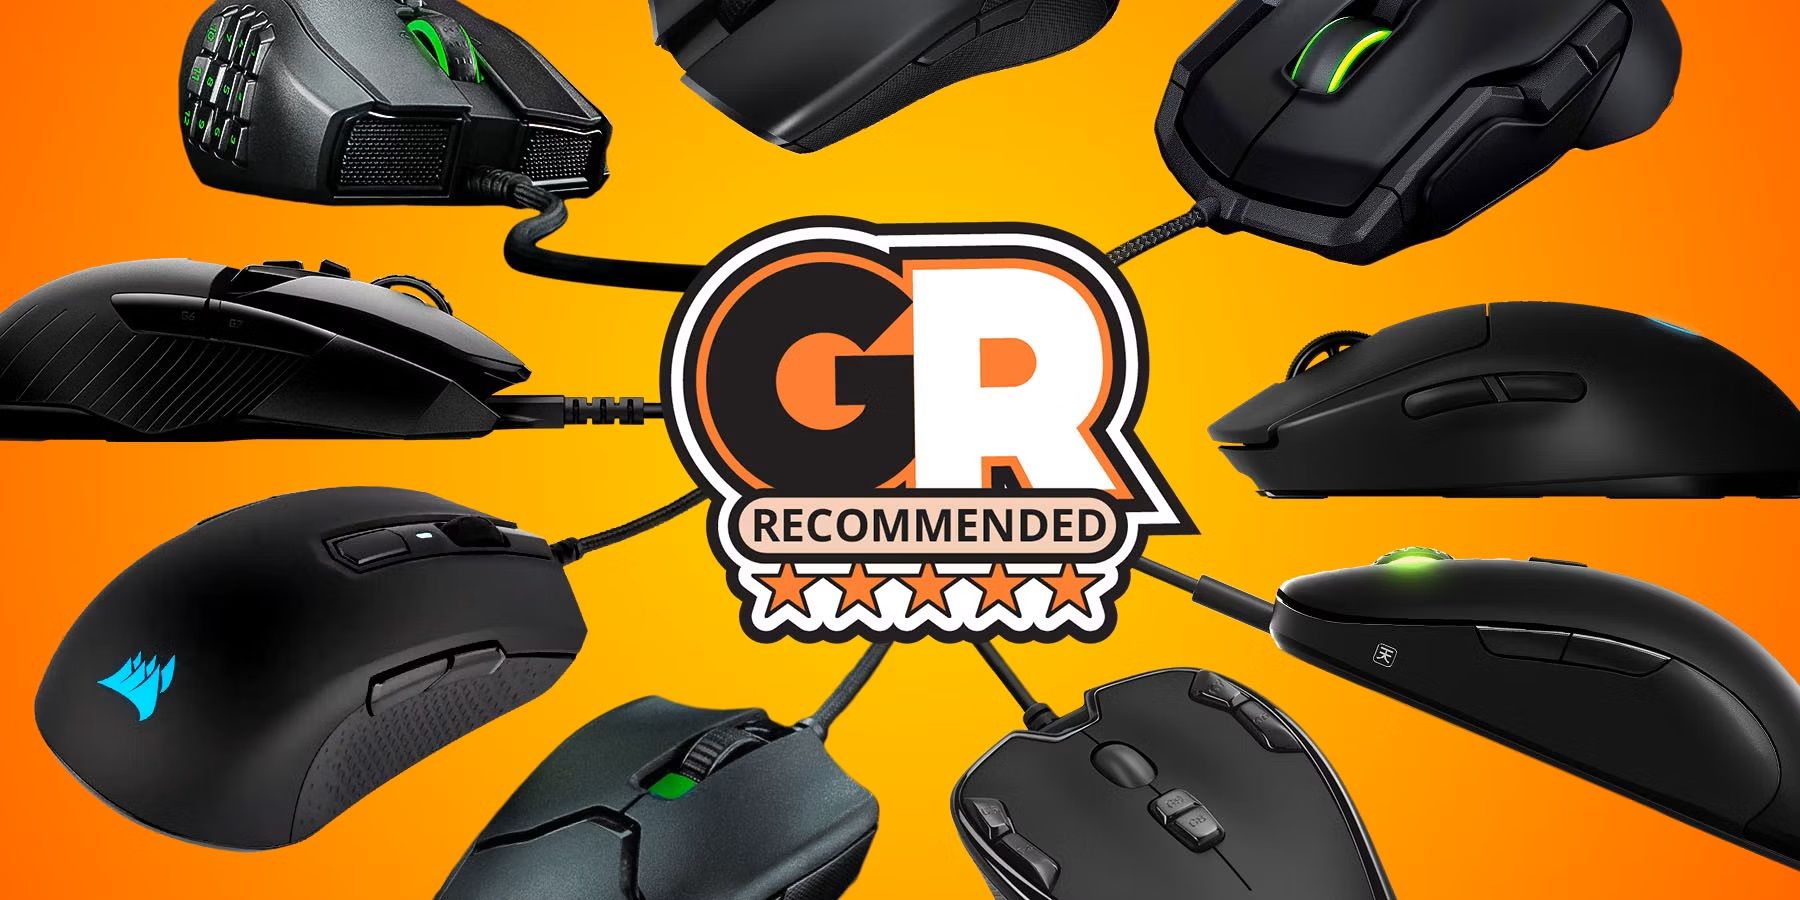 What Gaming Mice Do The Pros Use?